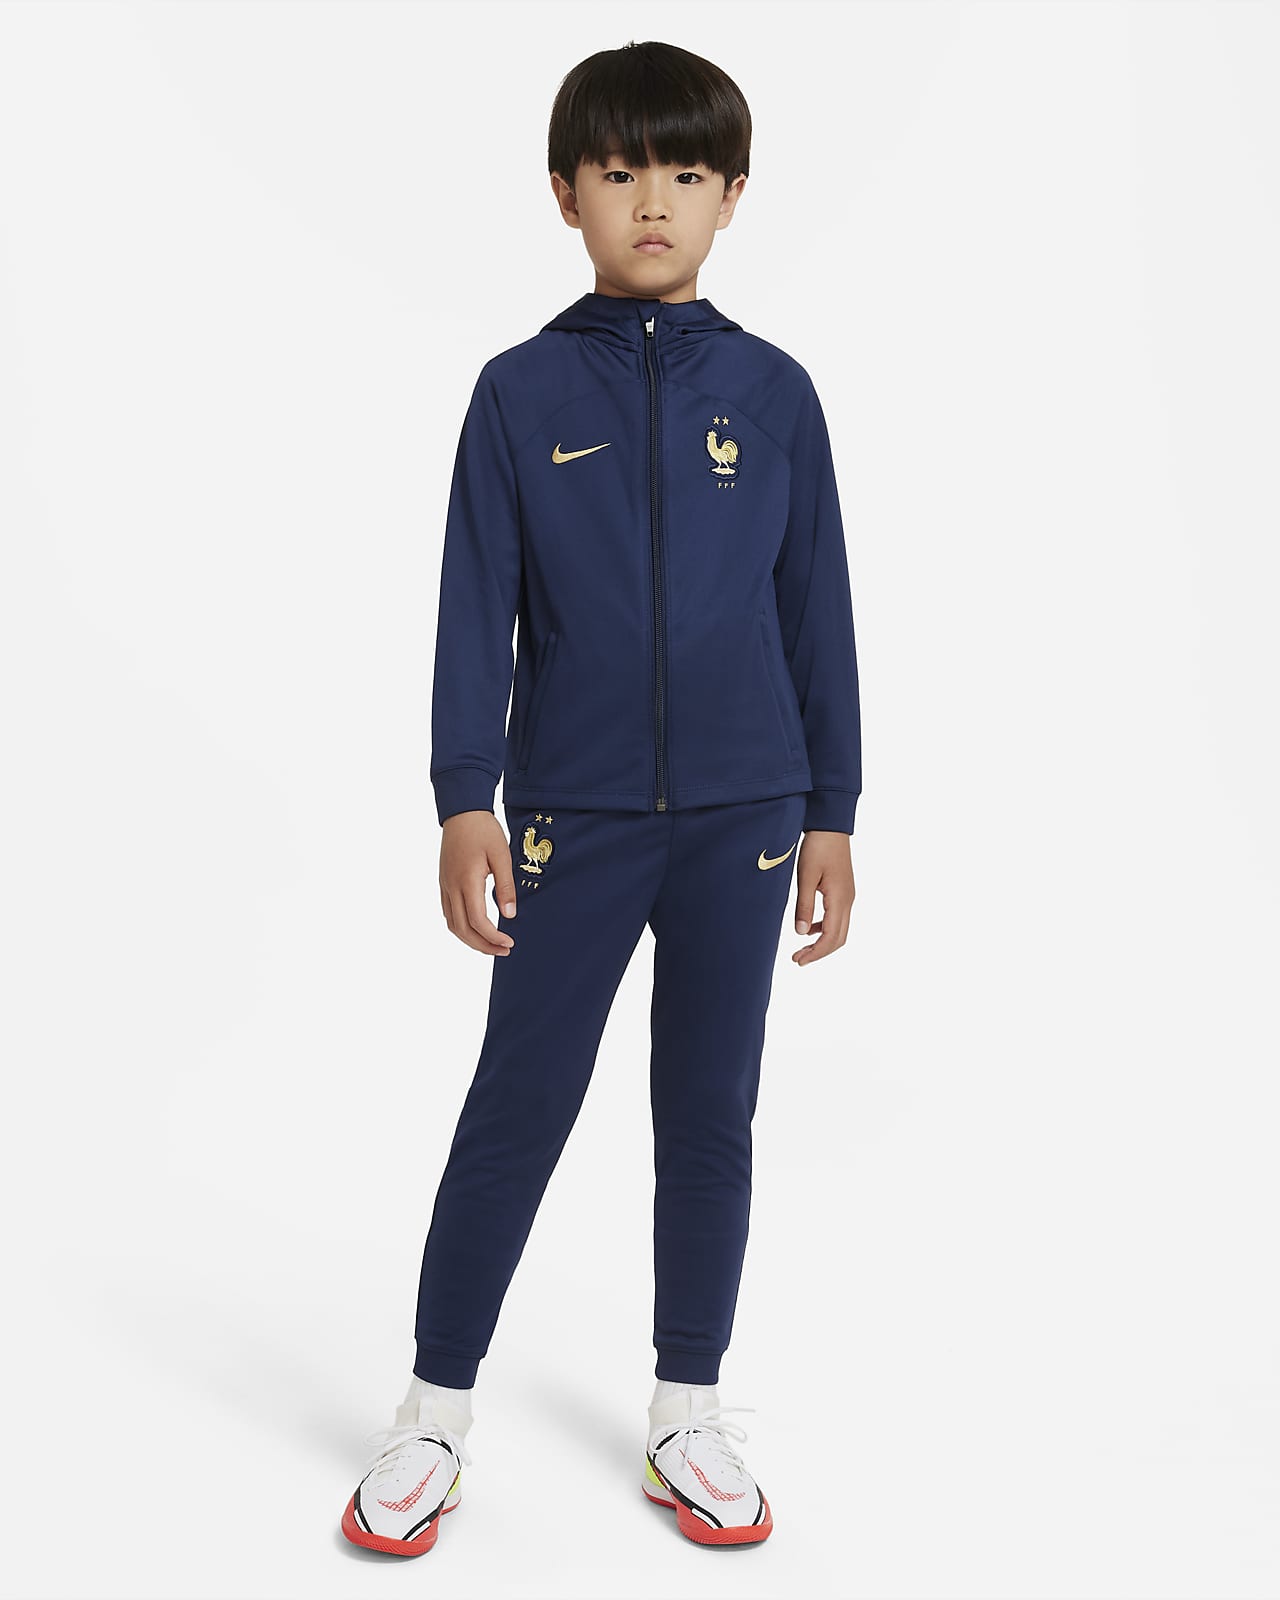 FFF Strike Younger Kids' Nike Dri-FIT Hooded Football Tracksuit